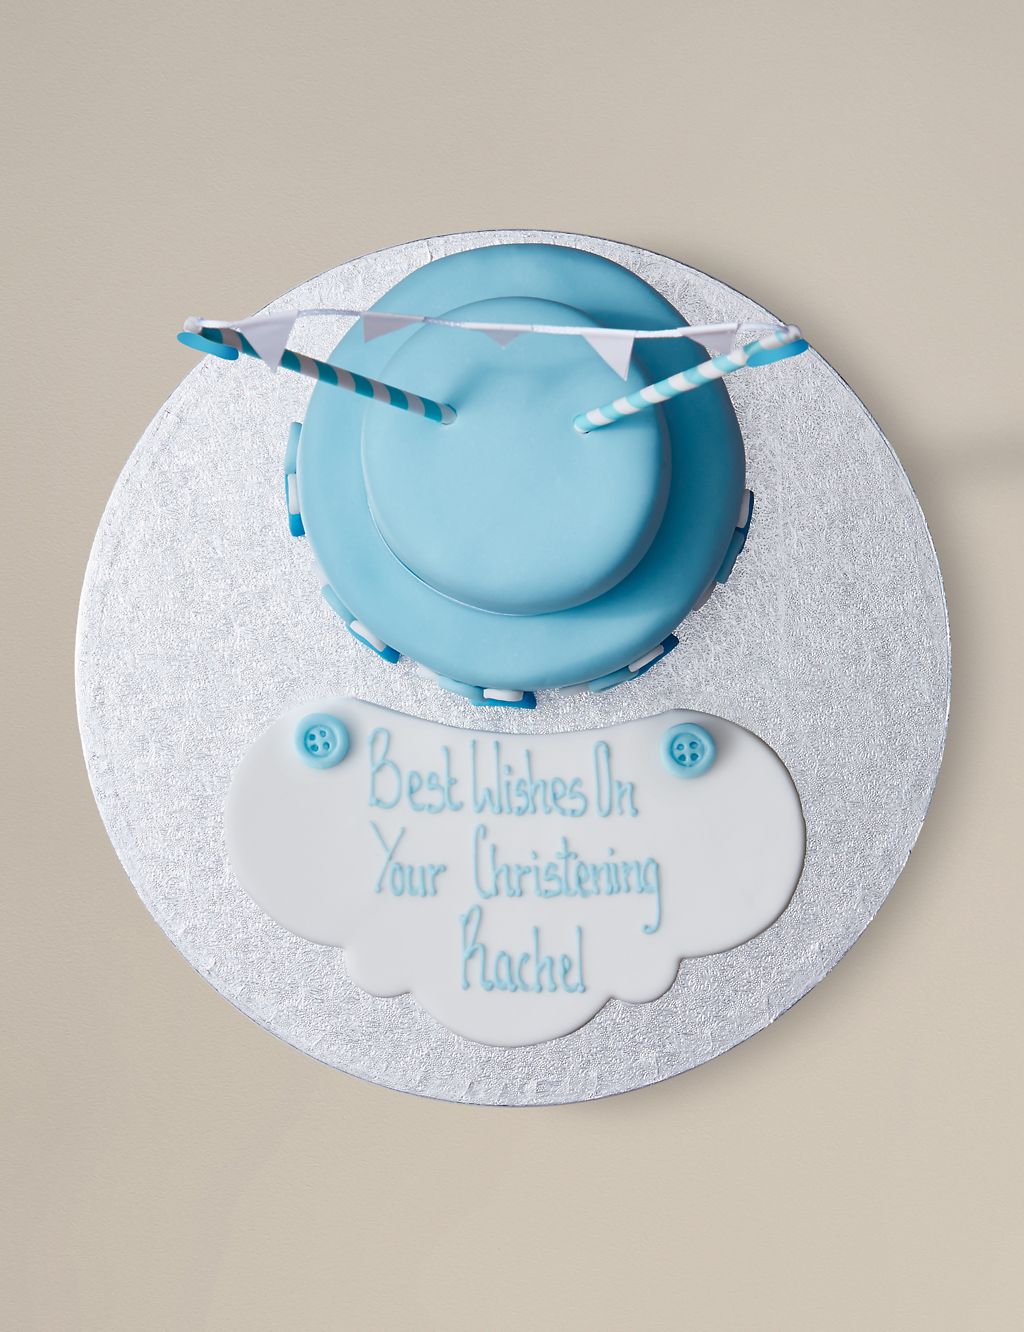 Personalised Button & Bunting Cake in Blue & White (Serves 20) 6 of 6